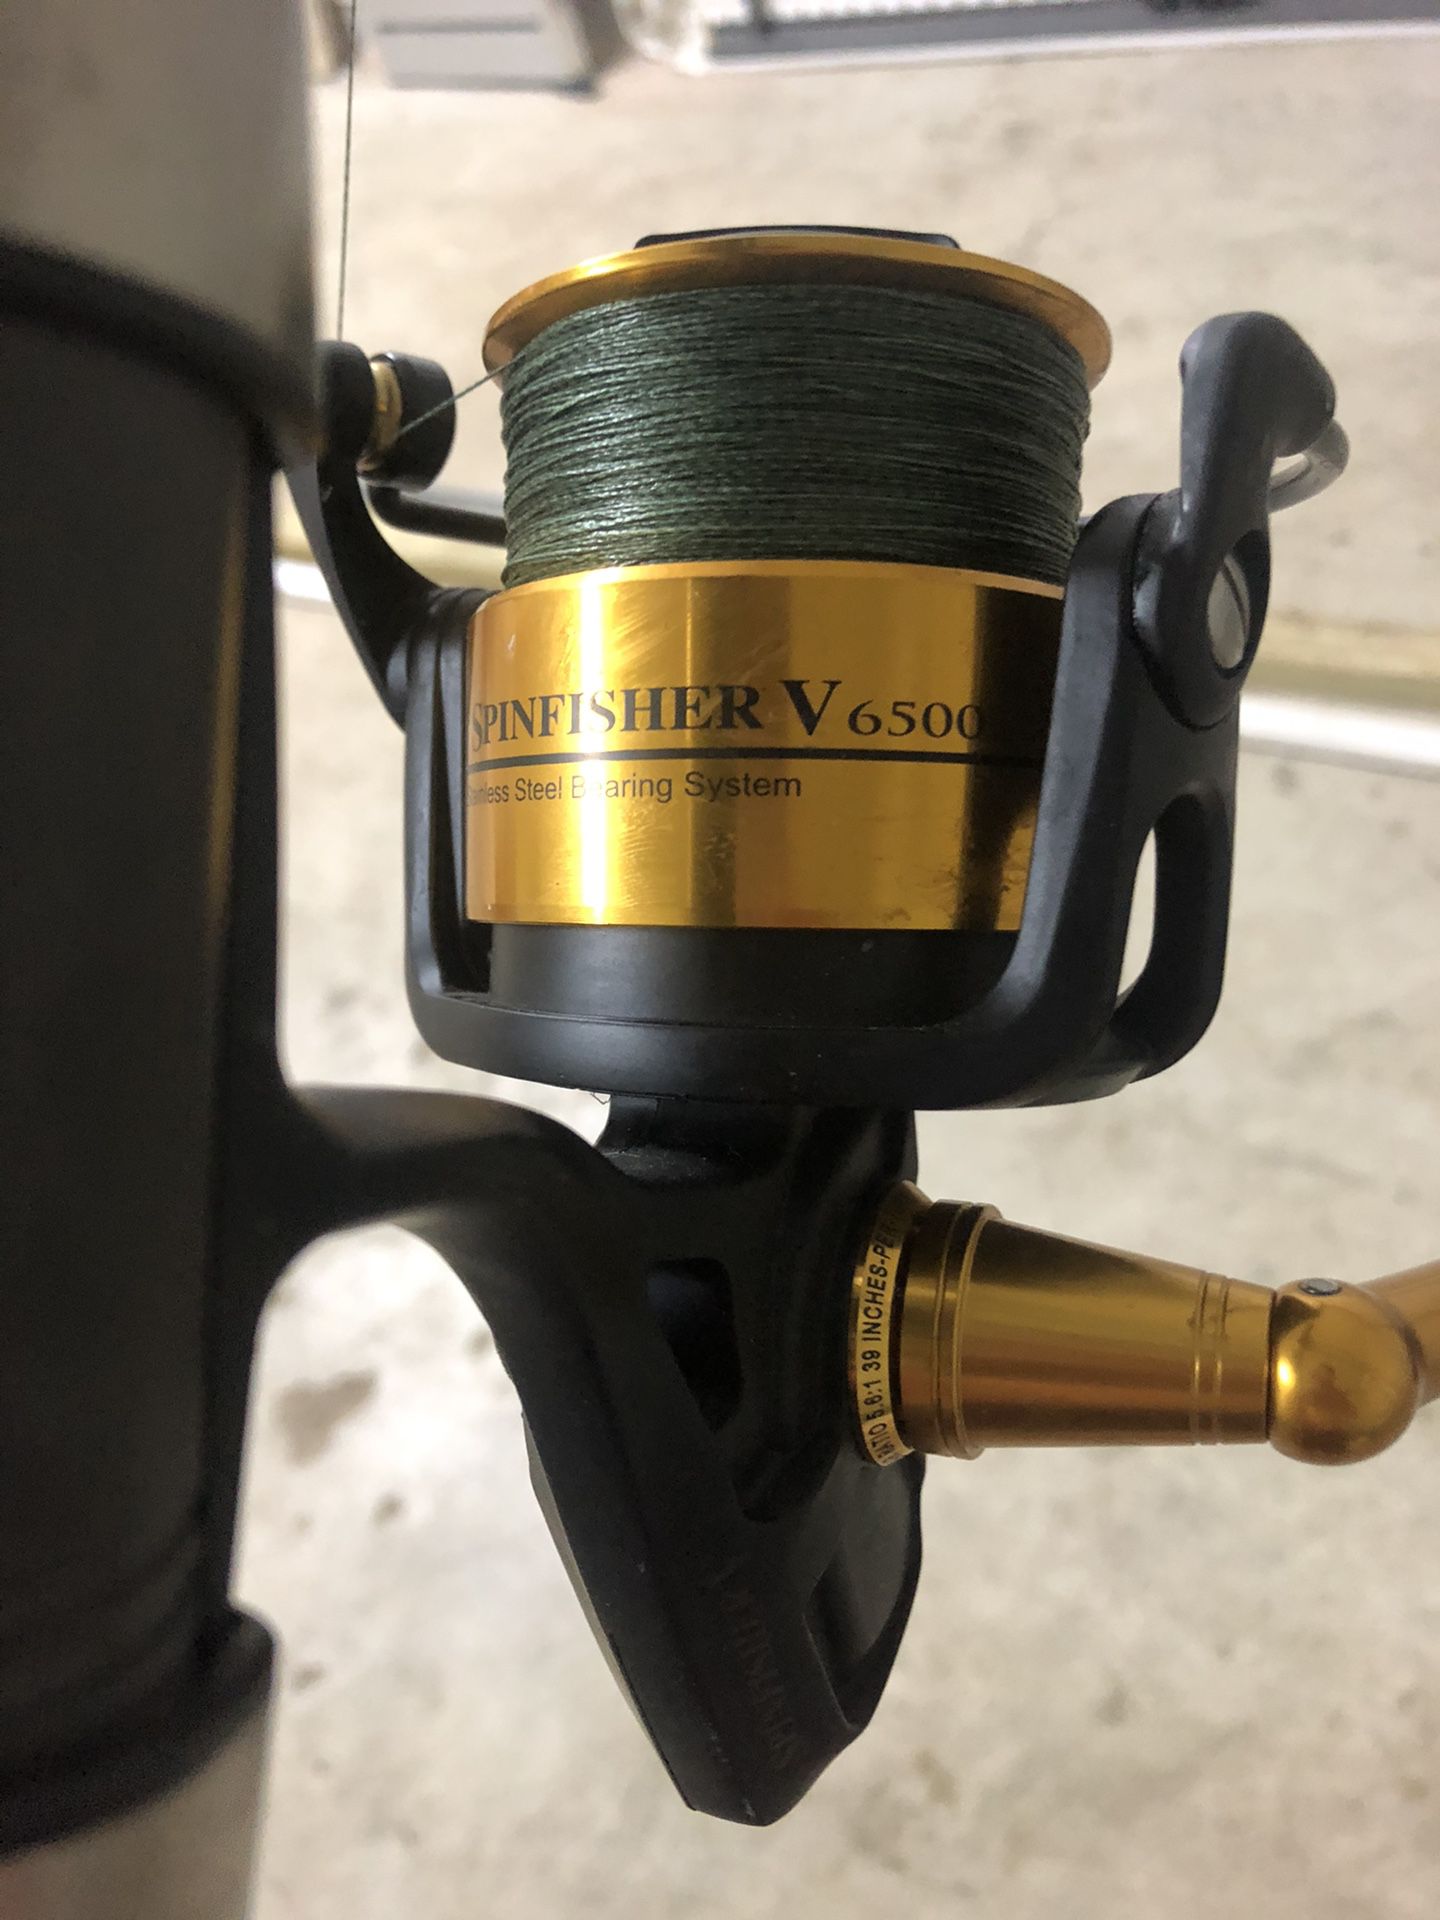 Jigging uglystick with a 6500 Spinfisher